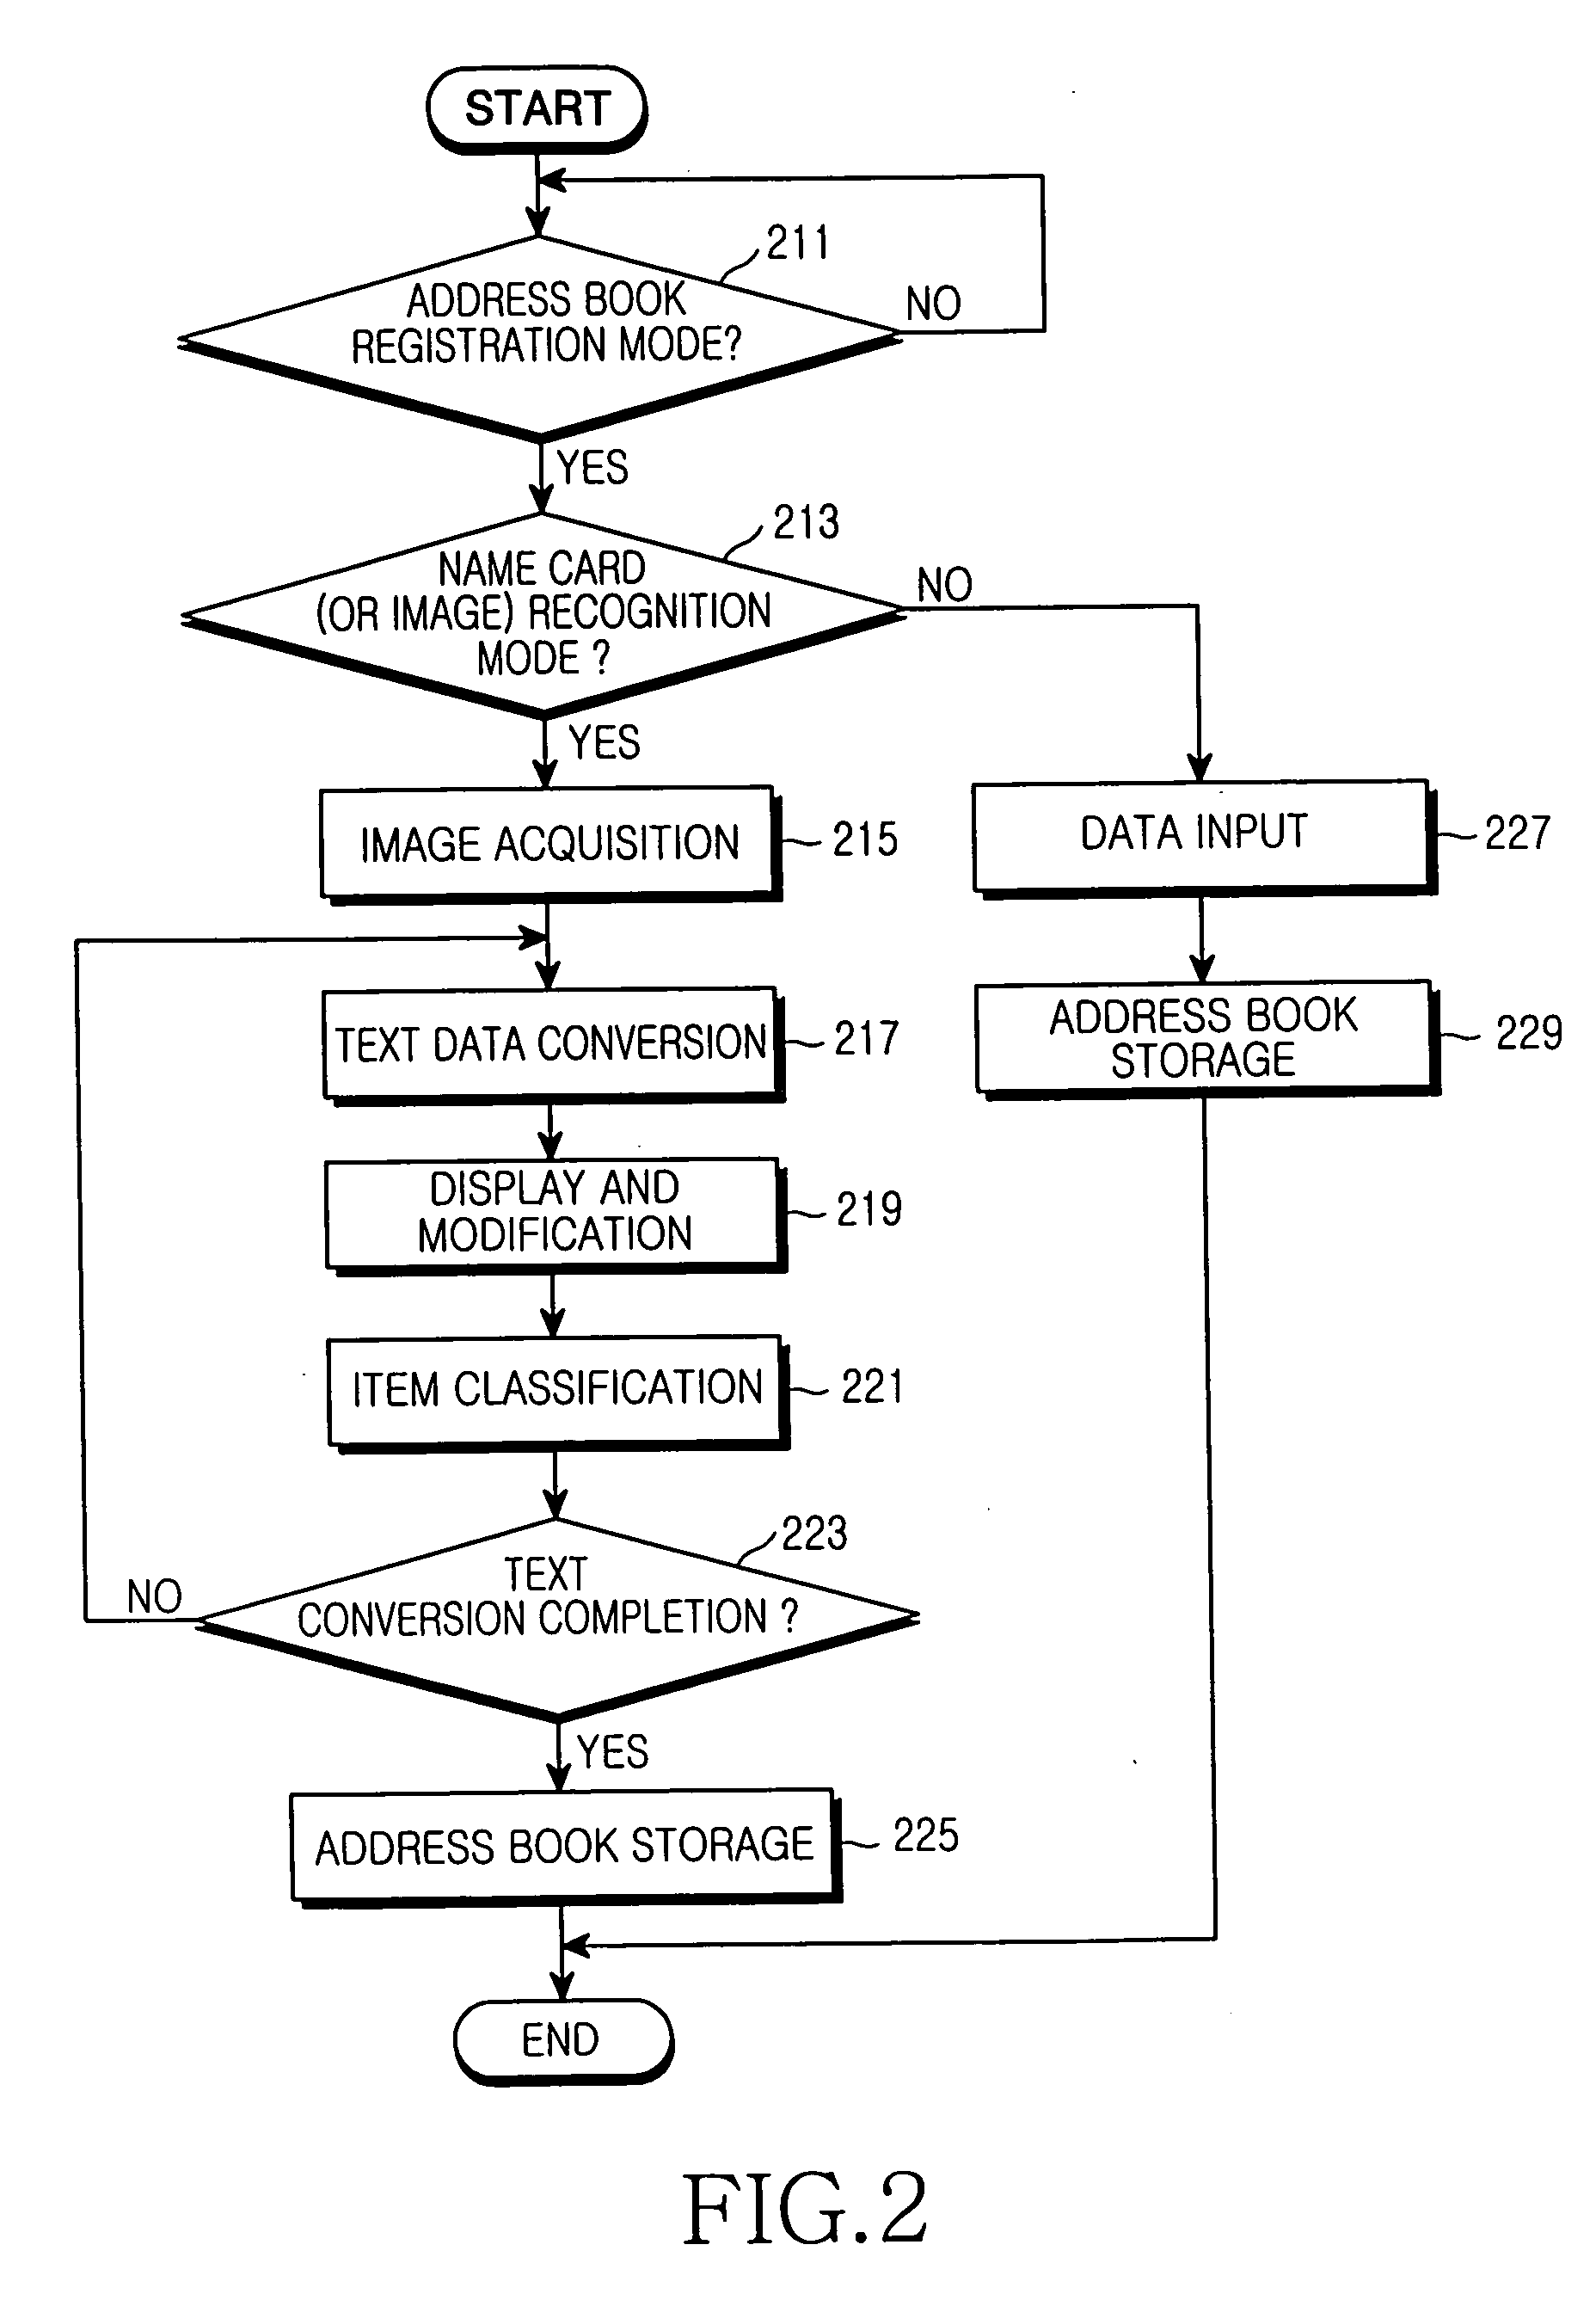 Managing an address book in portable terminal having a camera